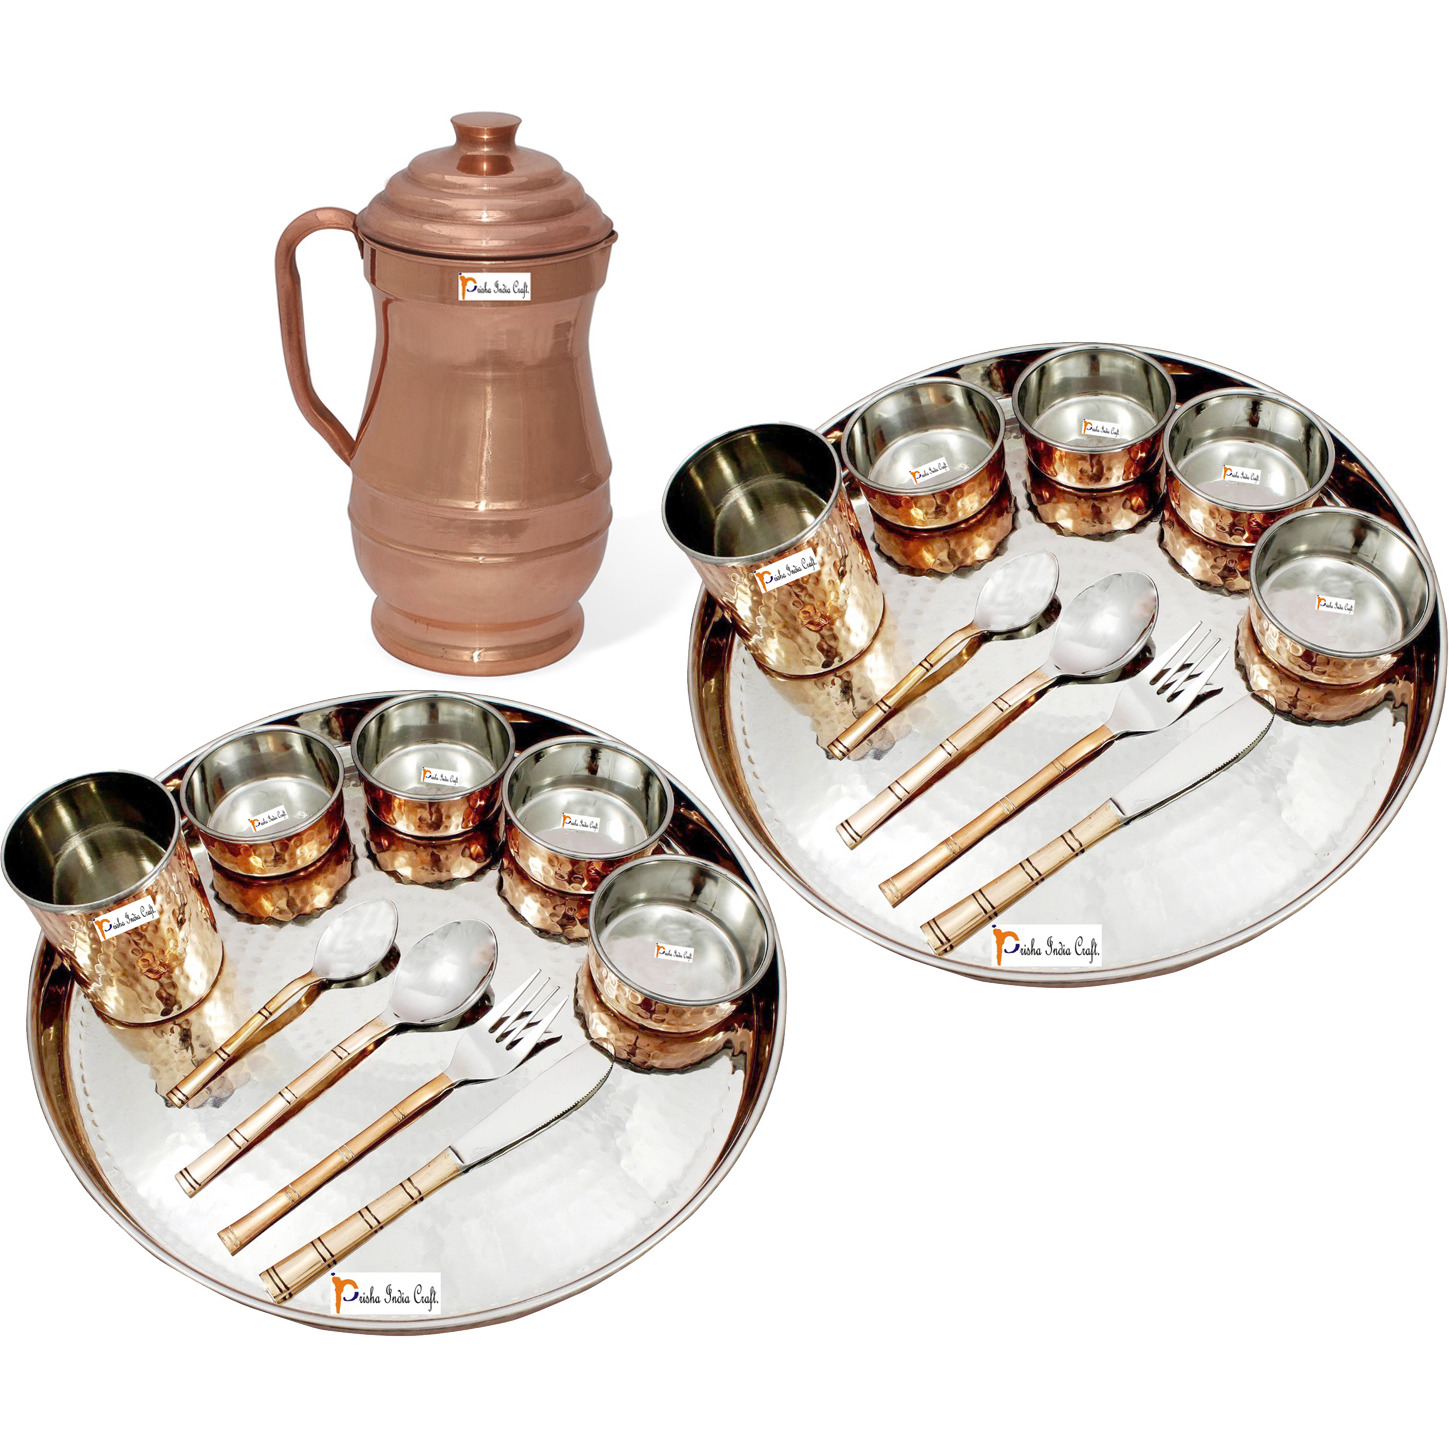 Prisha India Craft B. Set of 2 Dinnerware Traditional Stainless Steel Copper Dinner Set of Thali Plate, Bowls, Glass and Spoons, Dia 13  With 1 Pure Copper Maharaja Pitcher Jug - Christmas Gift